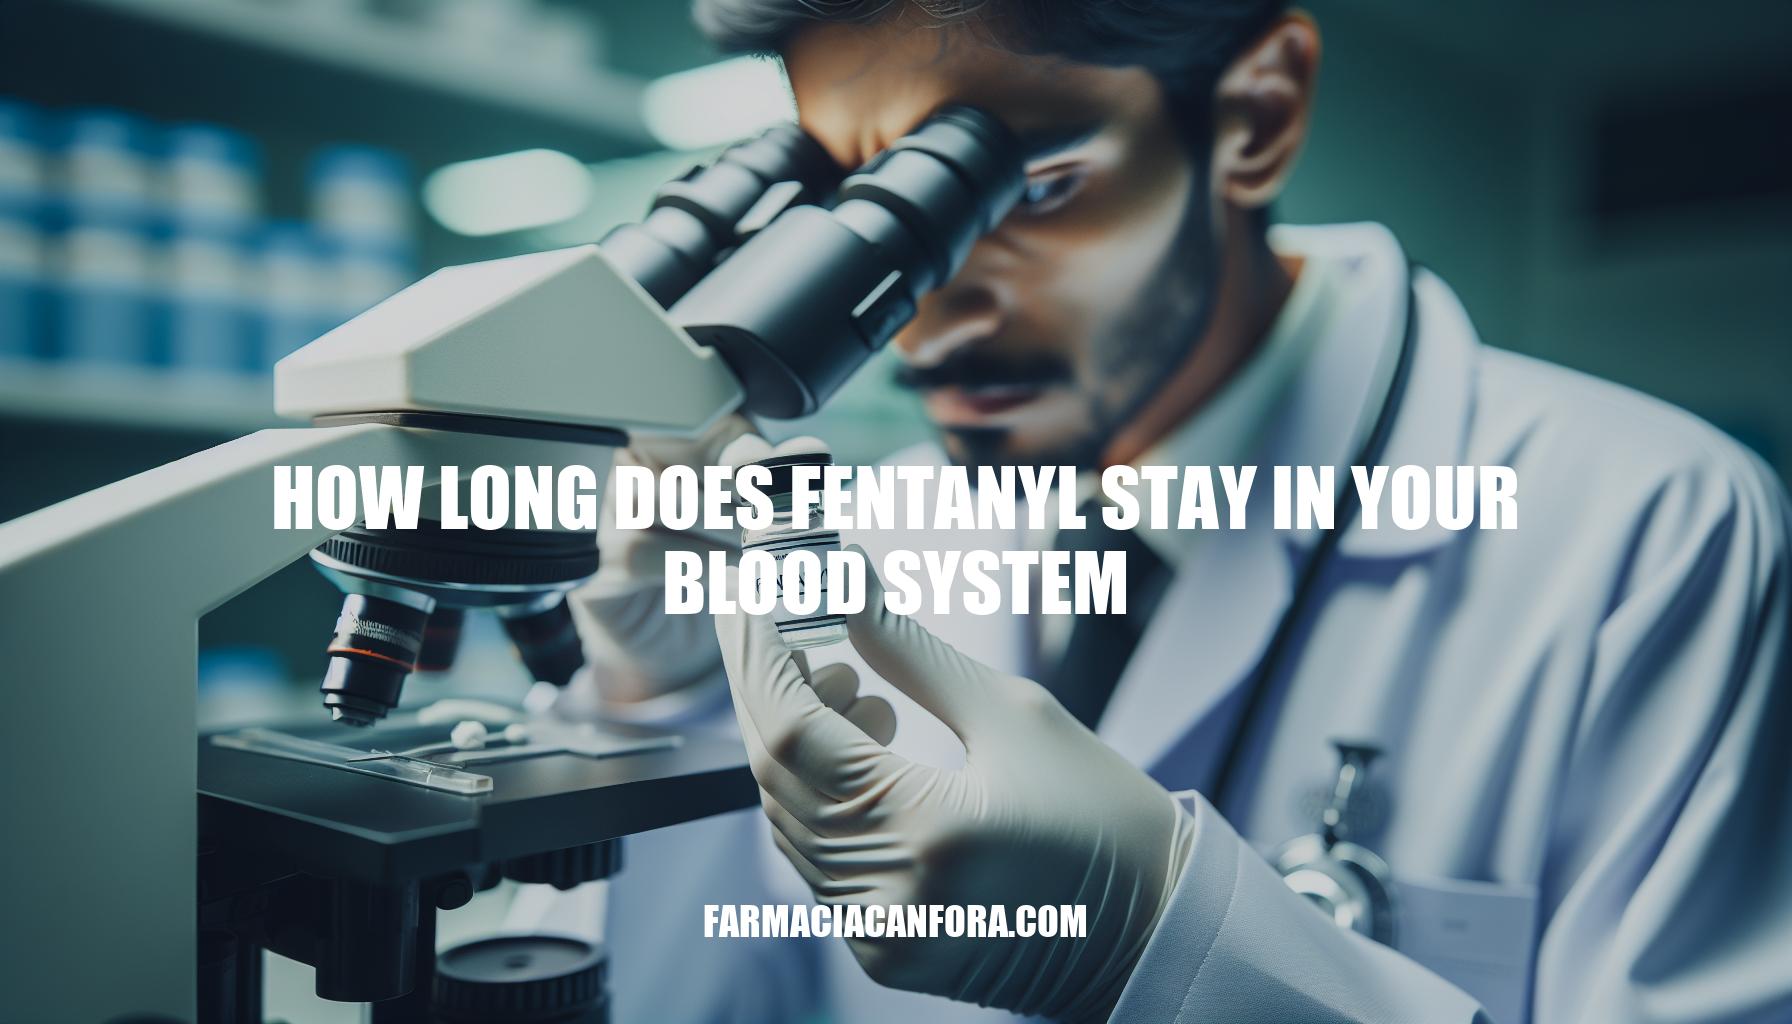 Understanding How Long Does Fentanyl Stay in Your Blood System